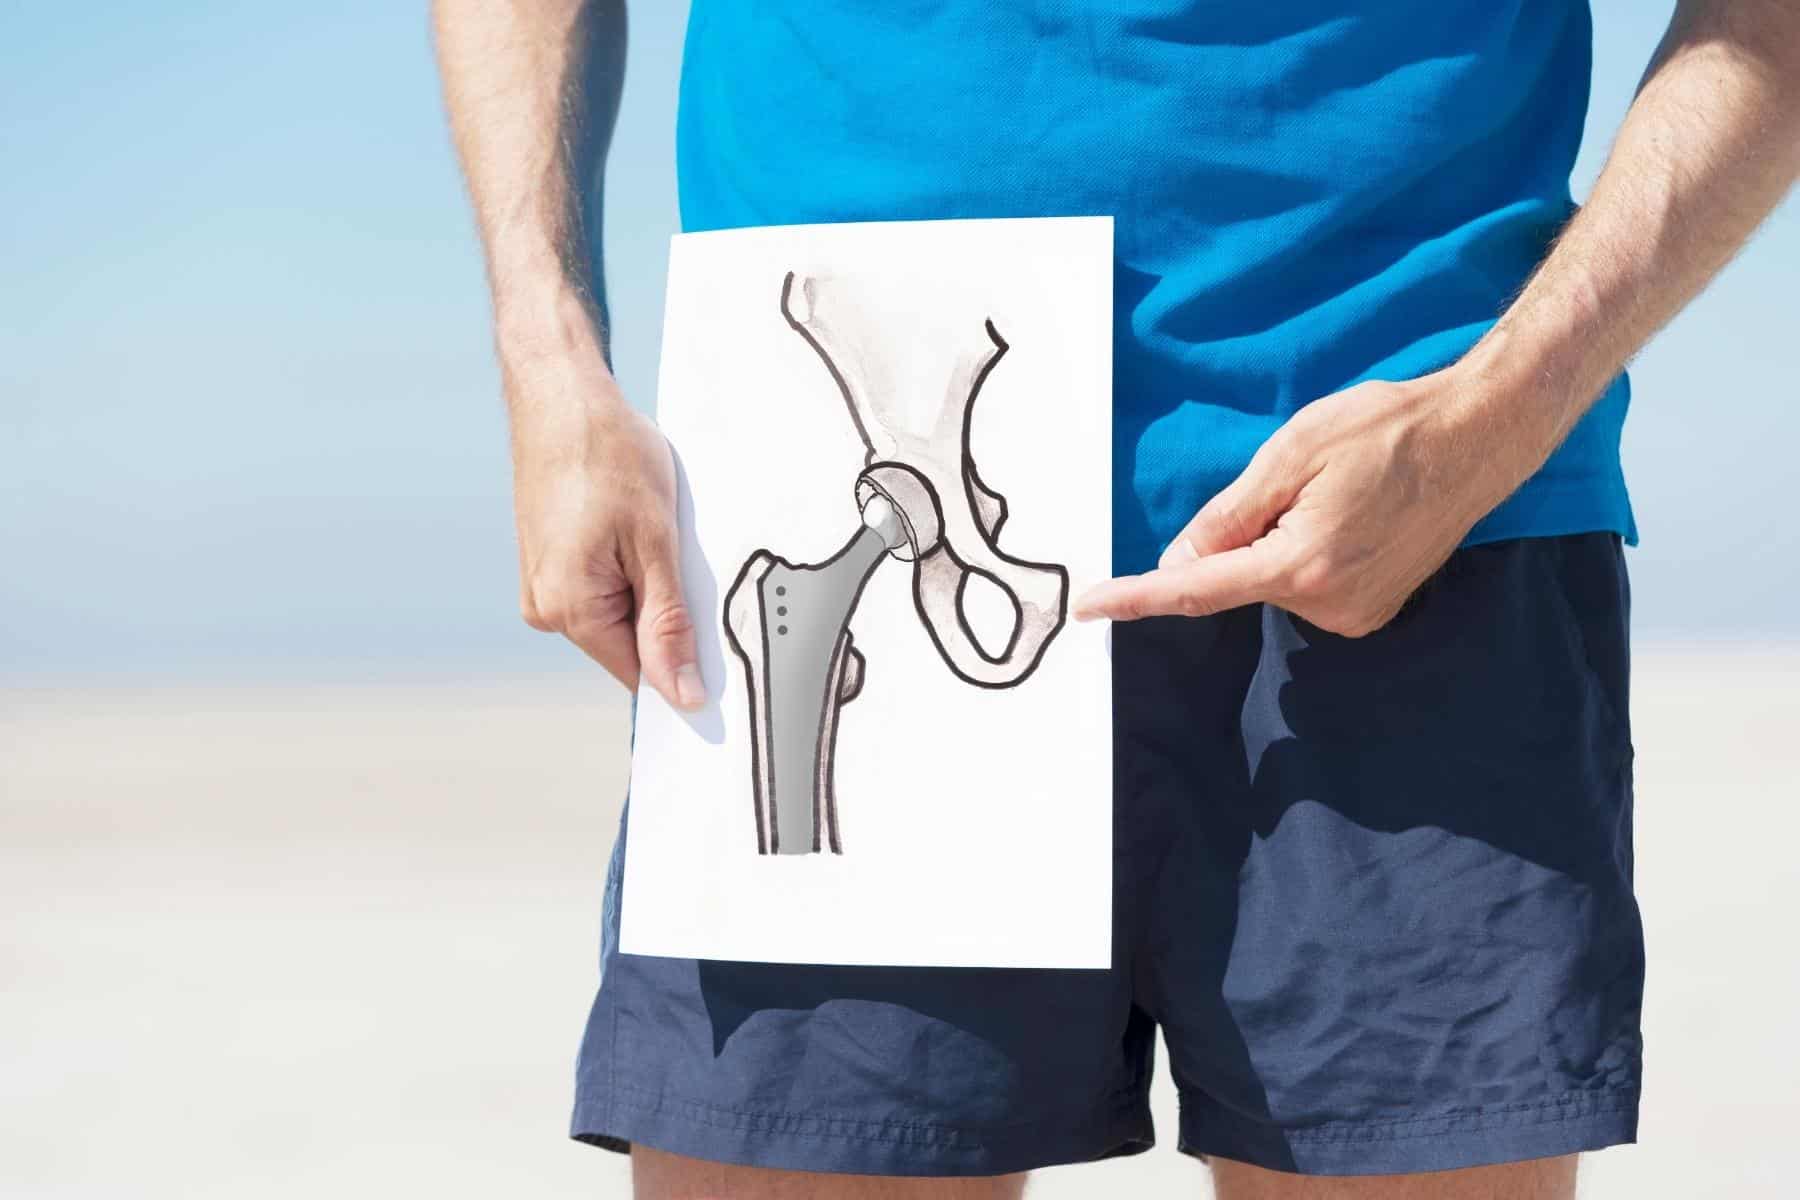 9 Must Do Exercises Before A Hip Replacement Surgery